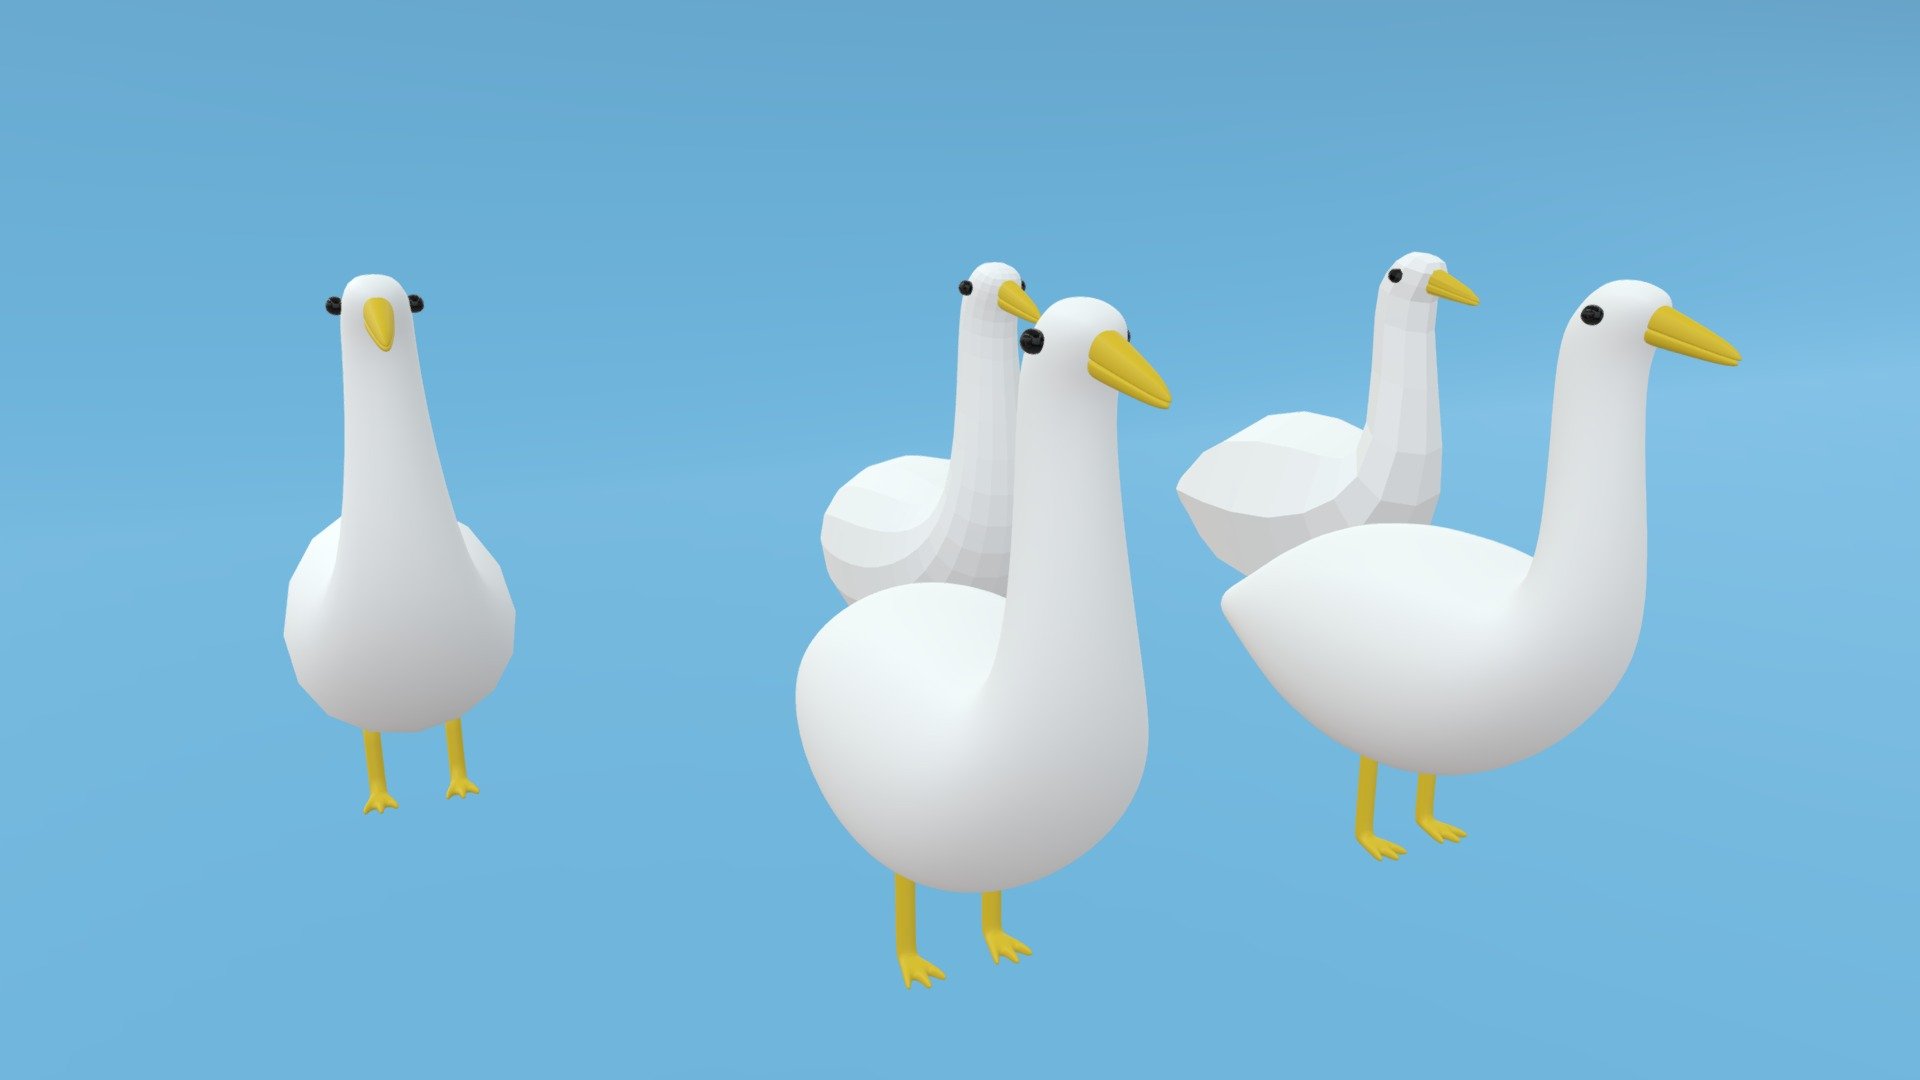 -Cartoon Goose.

-This product contains 35 objects.

-Total Vertices: 33,806, Polygons: 33,726.

-Subdivision Level 0: Vertices: 398, Polygons: 374.

-Subdivision Level 1: Vertices: 1,530, Polygons: 1,516.

-Subdivision Level 2: Vertices: 6,078, Polygons: 6,064.

-Subdivision Level 3: Vertices: 24,270, Polygons: 24,256.

-Materials, objects have the correct names.

-This product was created in Blender 2.8.

-Formats: blend, fbx, obj, c4d, dae, abc, stl, glb, unitypackage.

-We hope you enjoy this model.

-Thank you 3d model